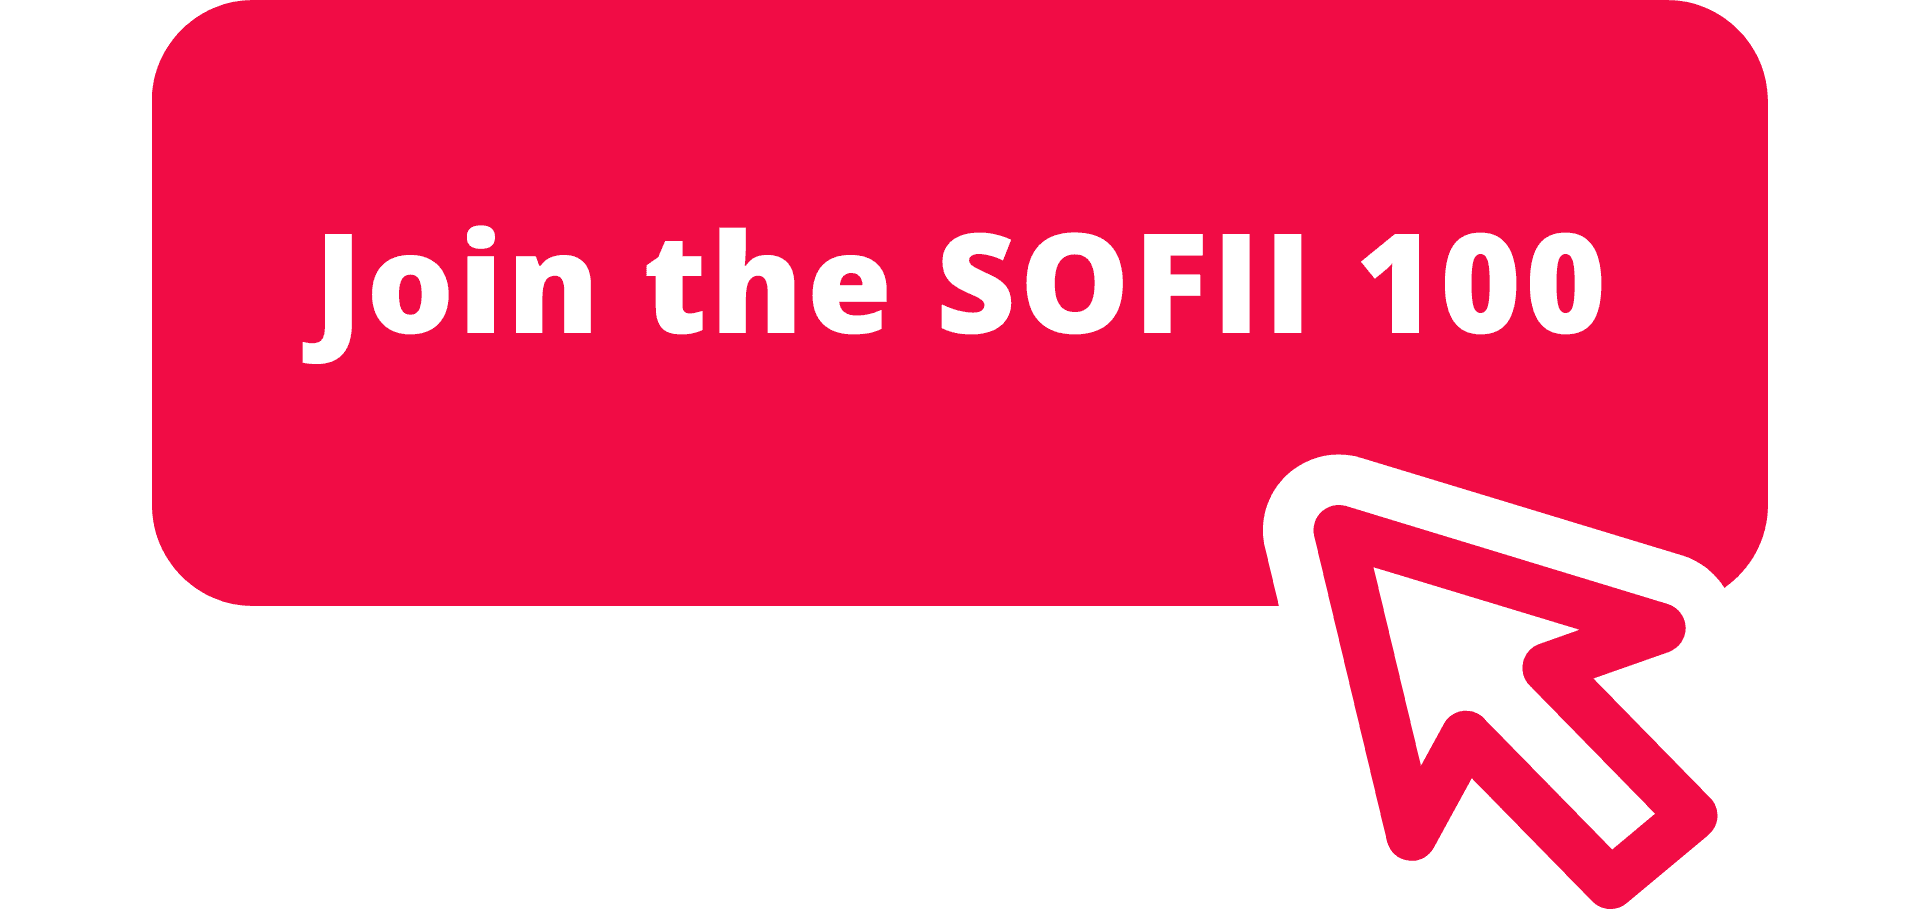 Join the SOFII 100